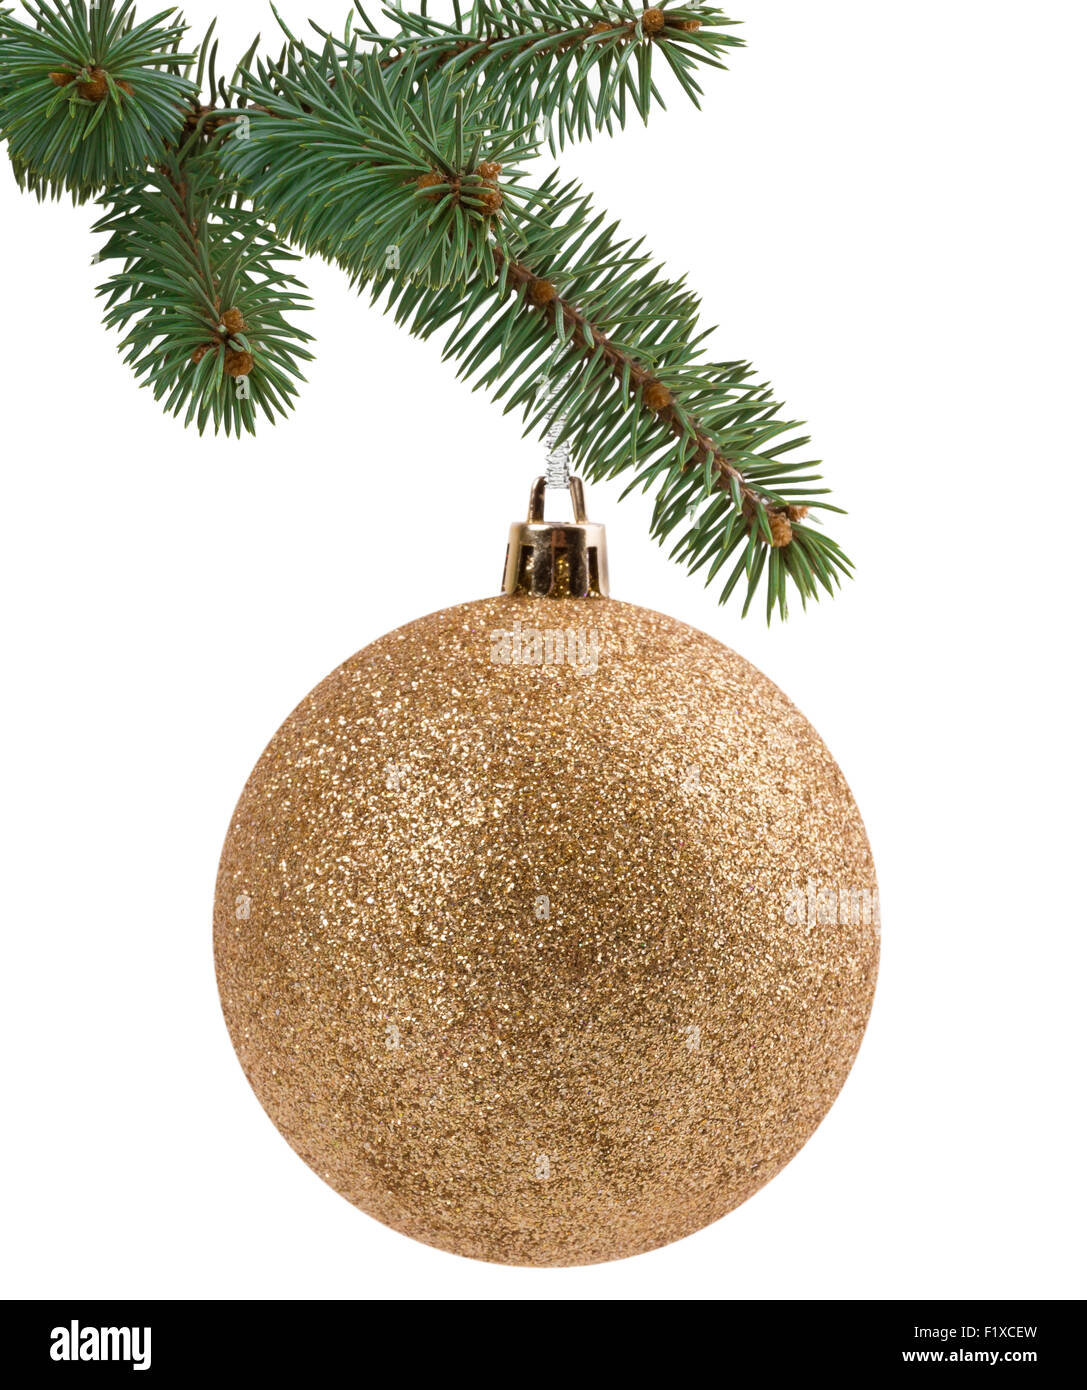 Christmas tree branch with a ball. Stock Photo